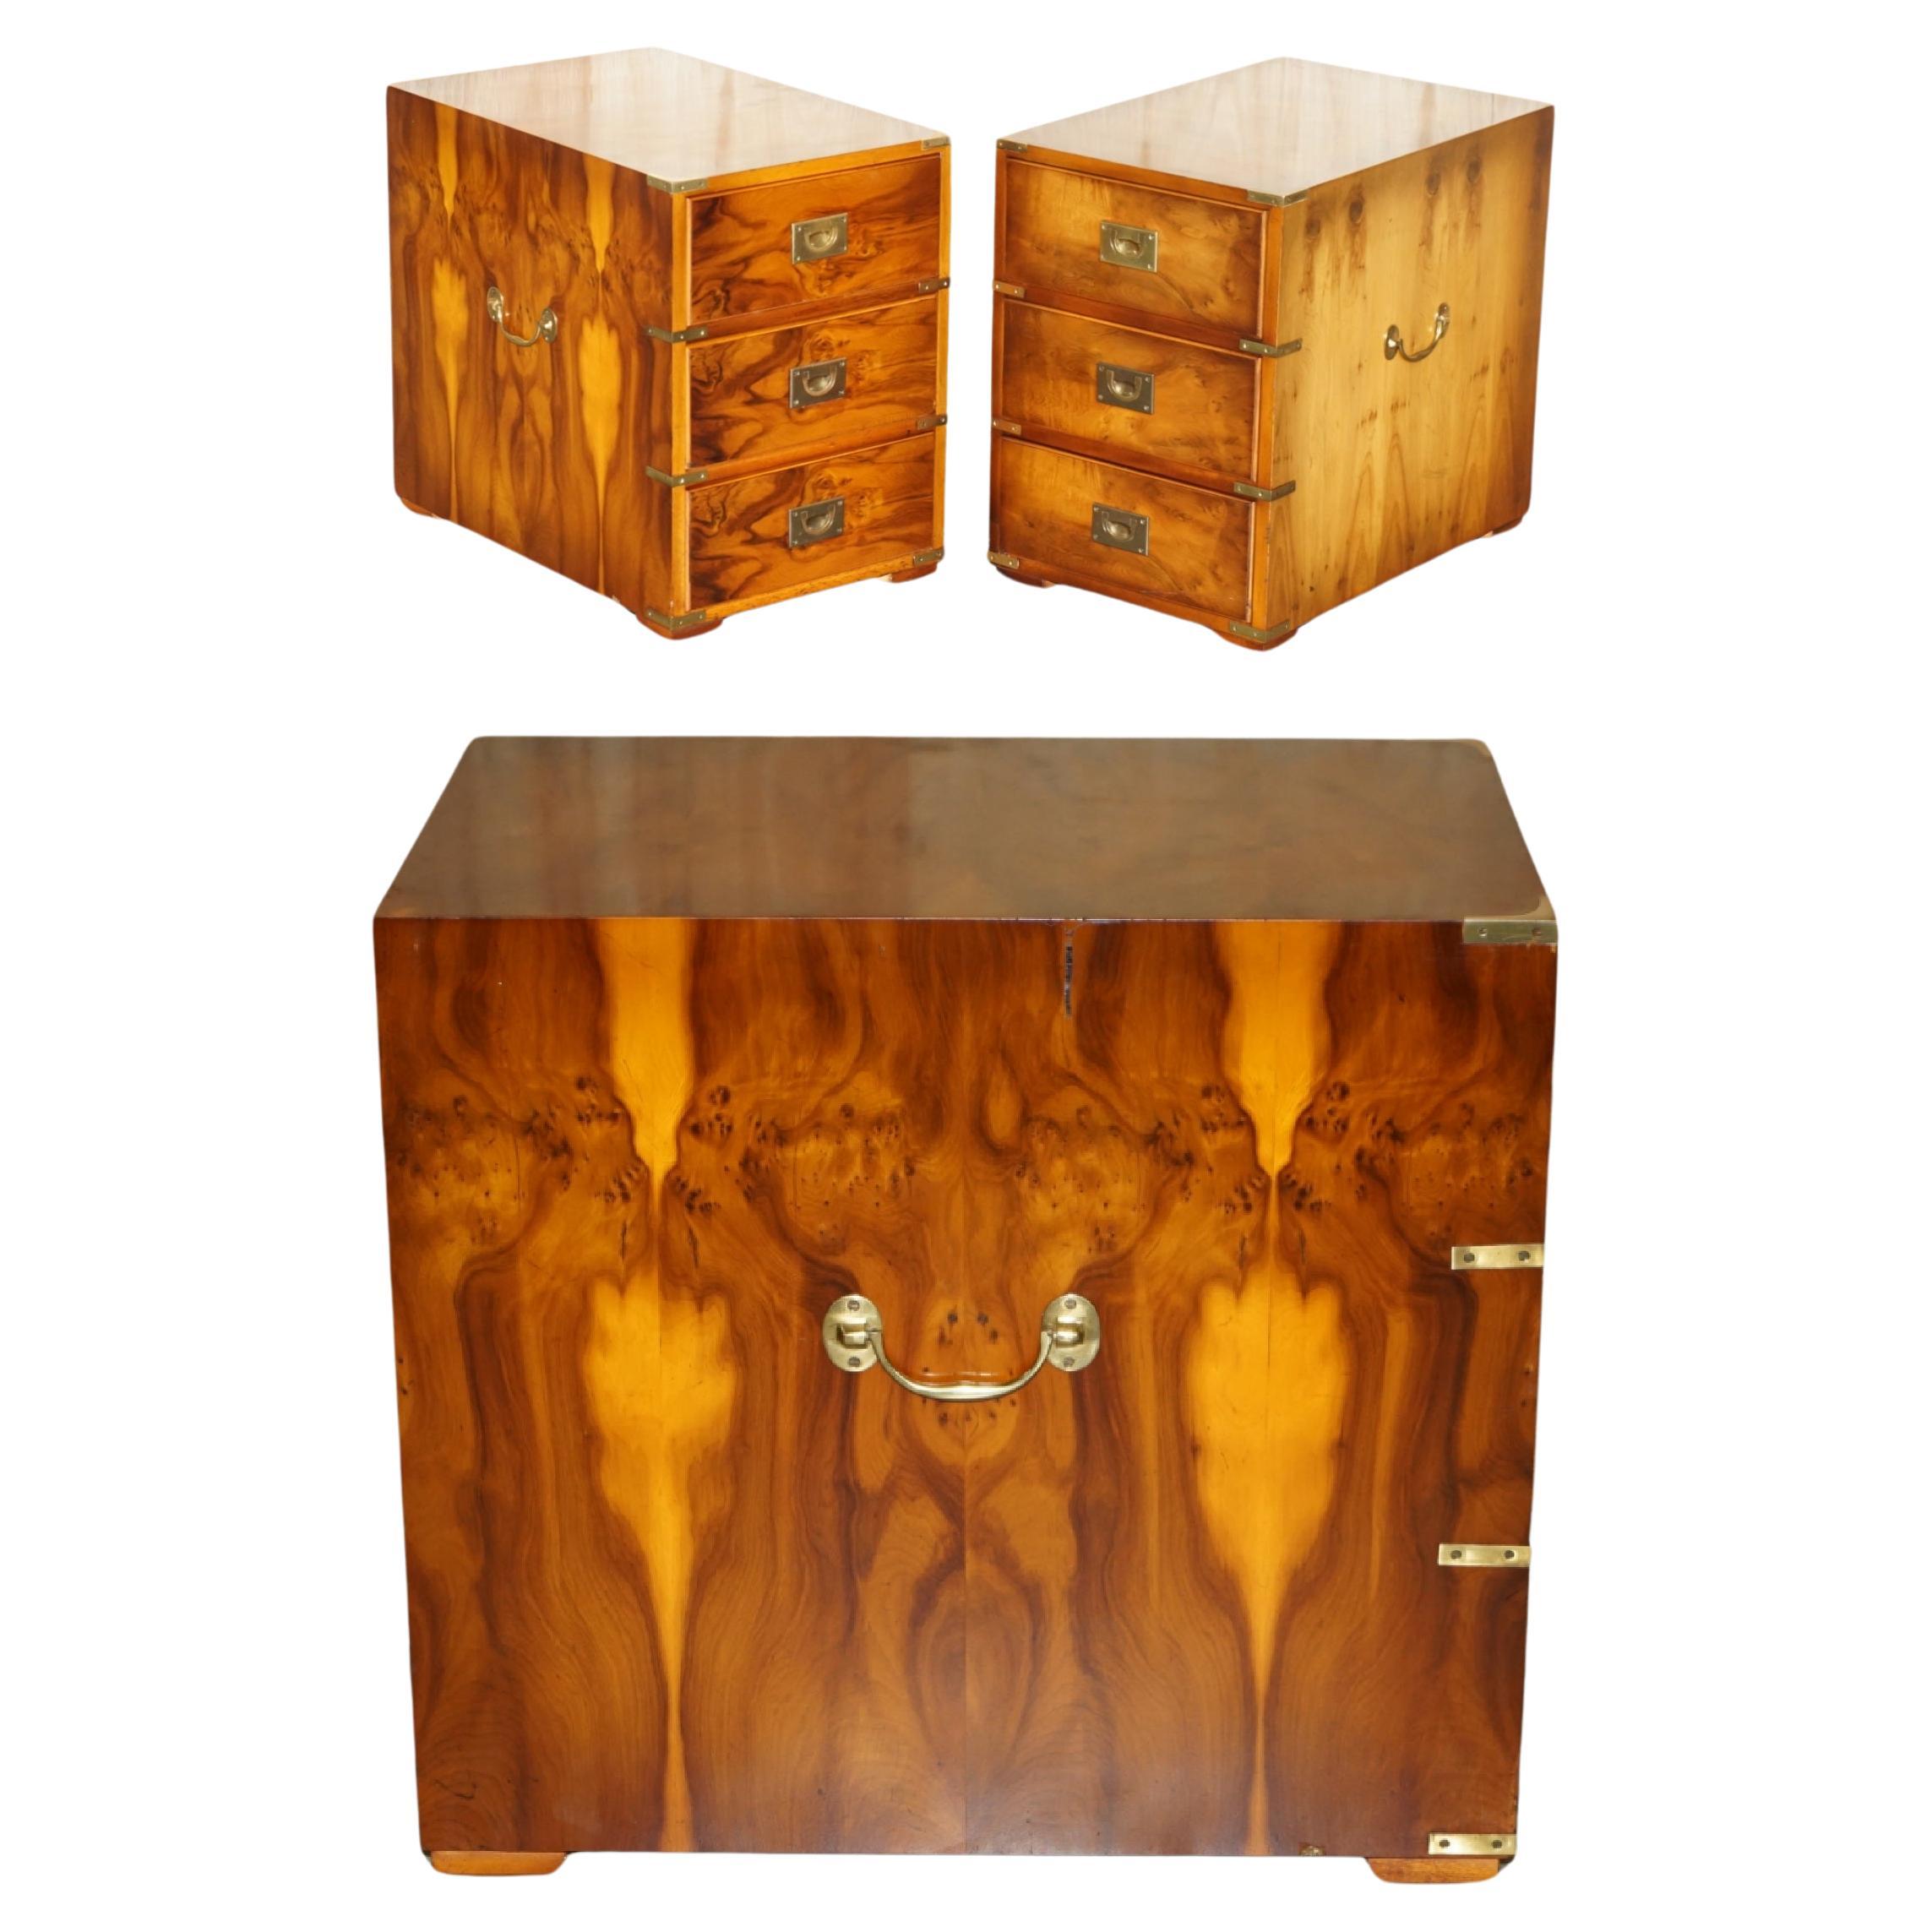 PAIR OF LARGE ViNTAGE MILITARY CAMPAIGN BURR YEW WOOD SIDE LAMP TABLE DRAWERS For Sale